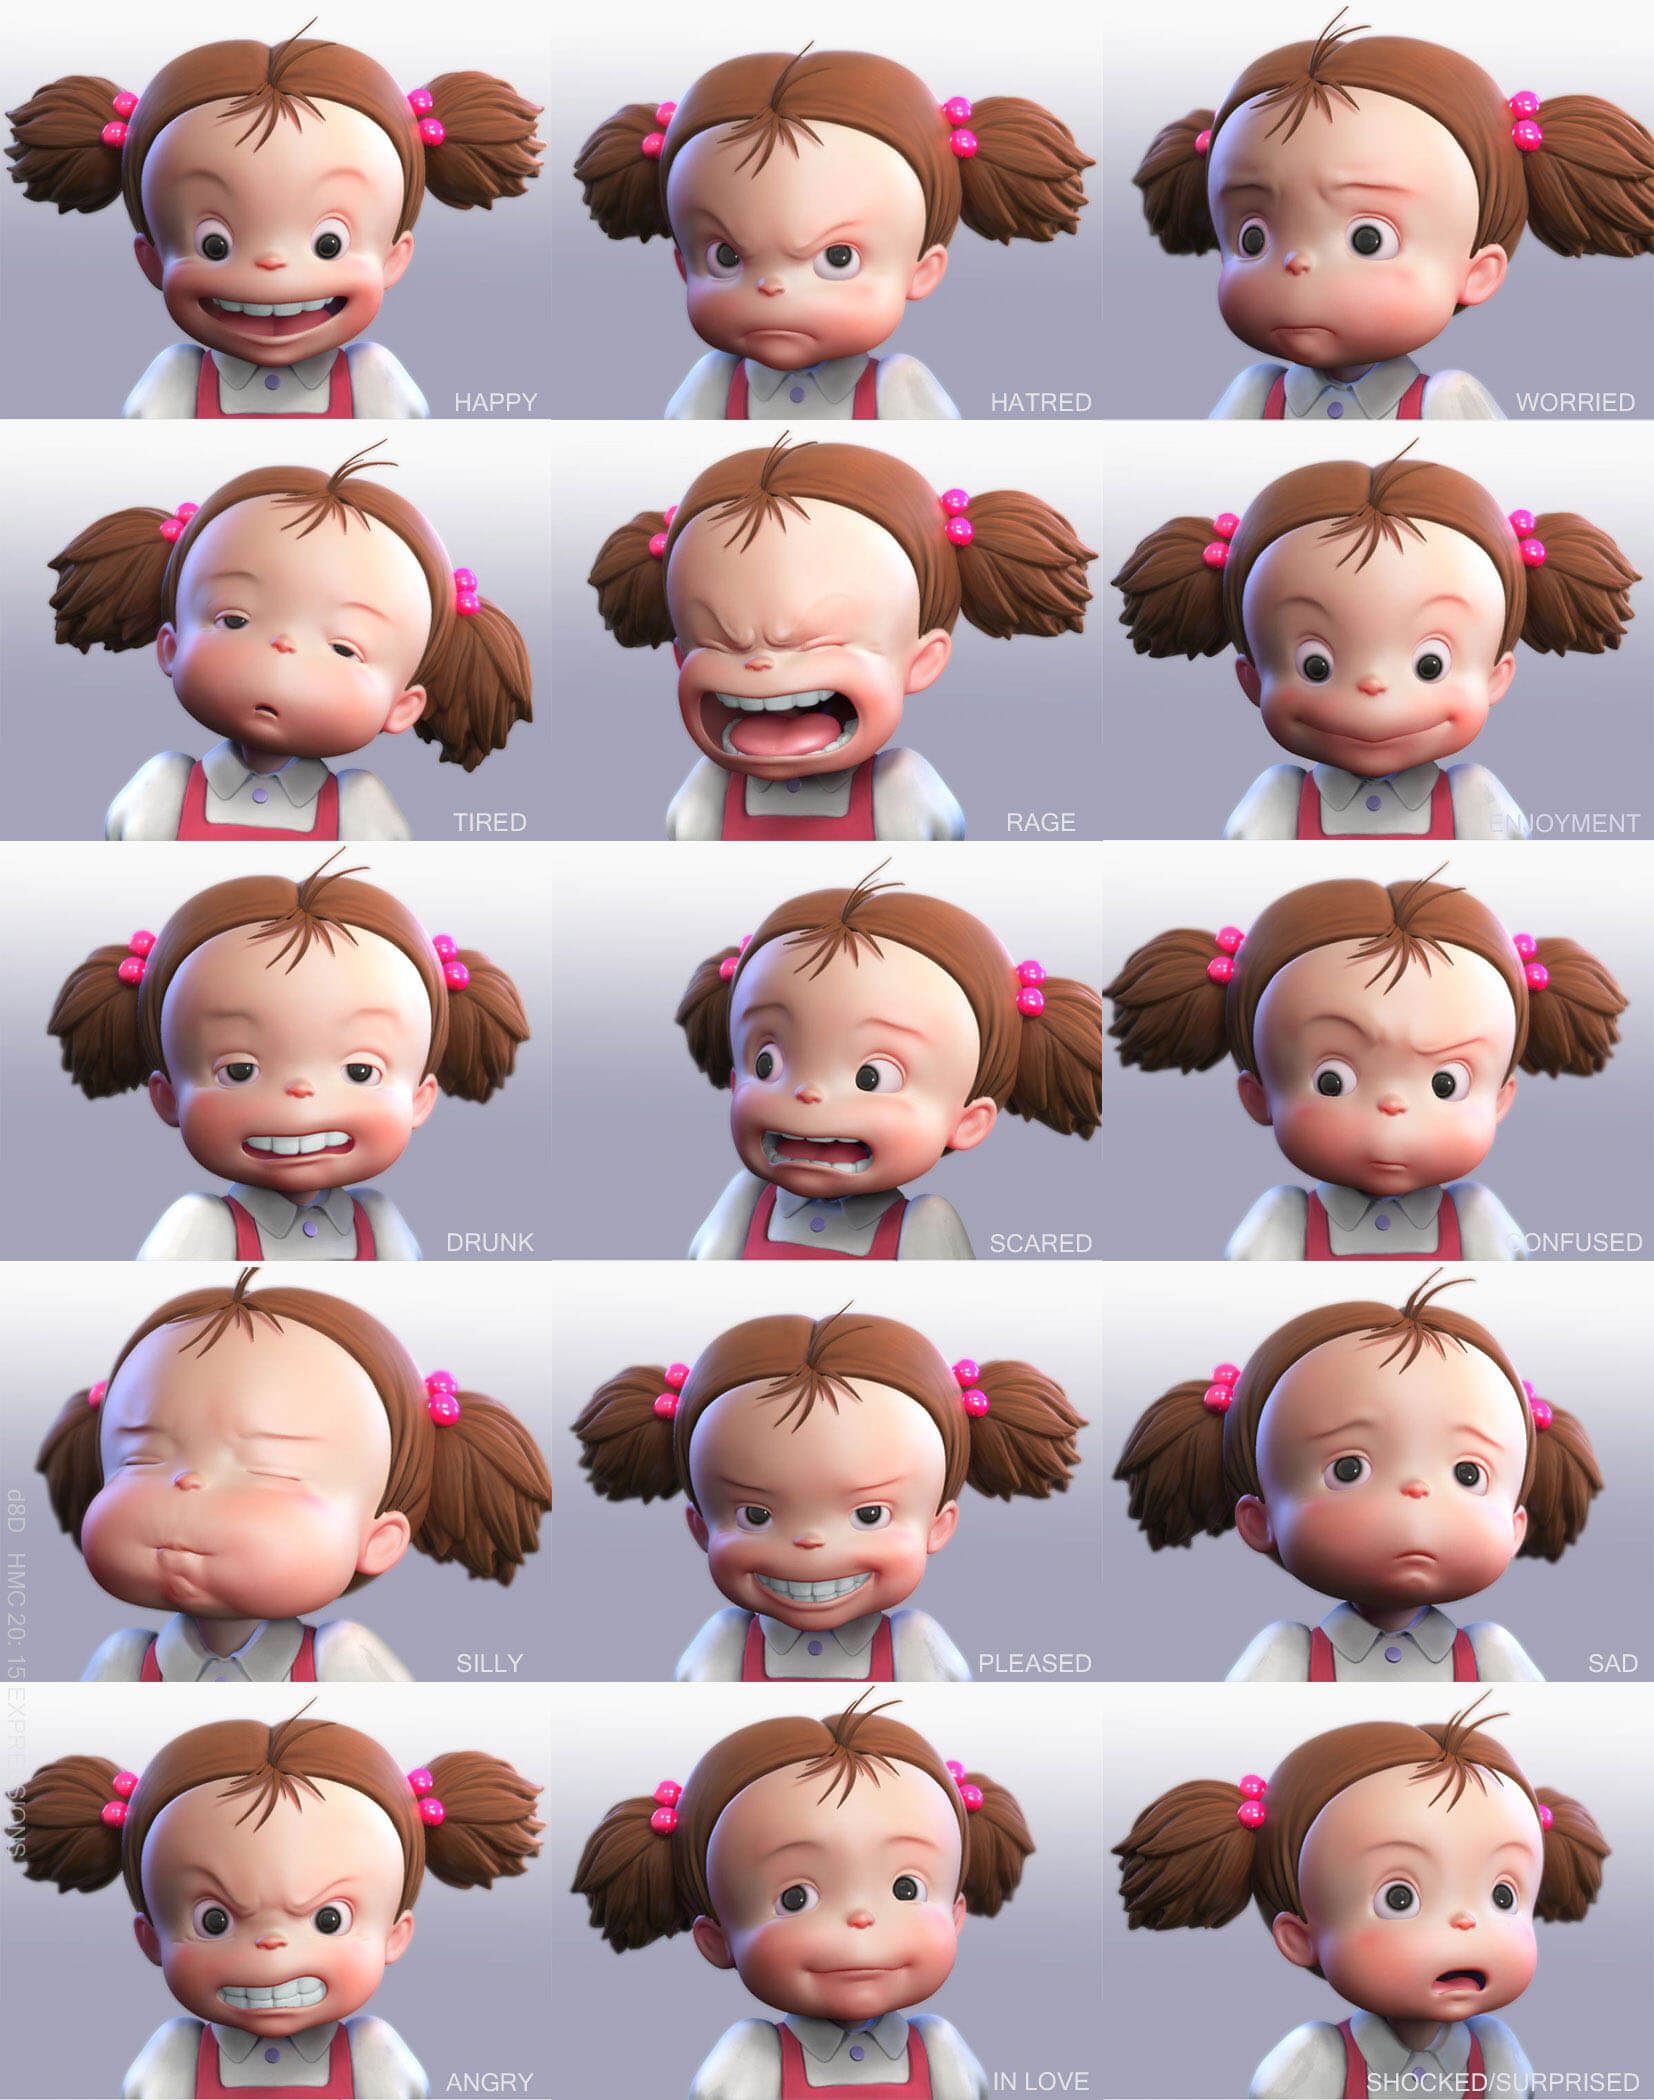 Fifteen different expressions.